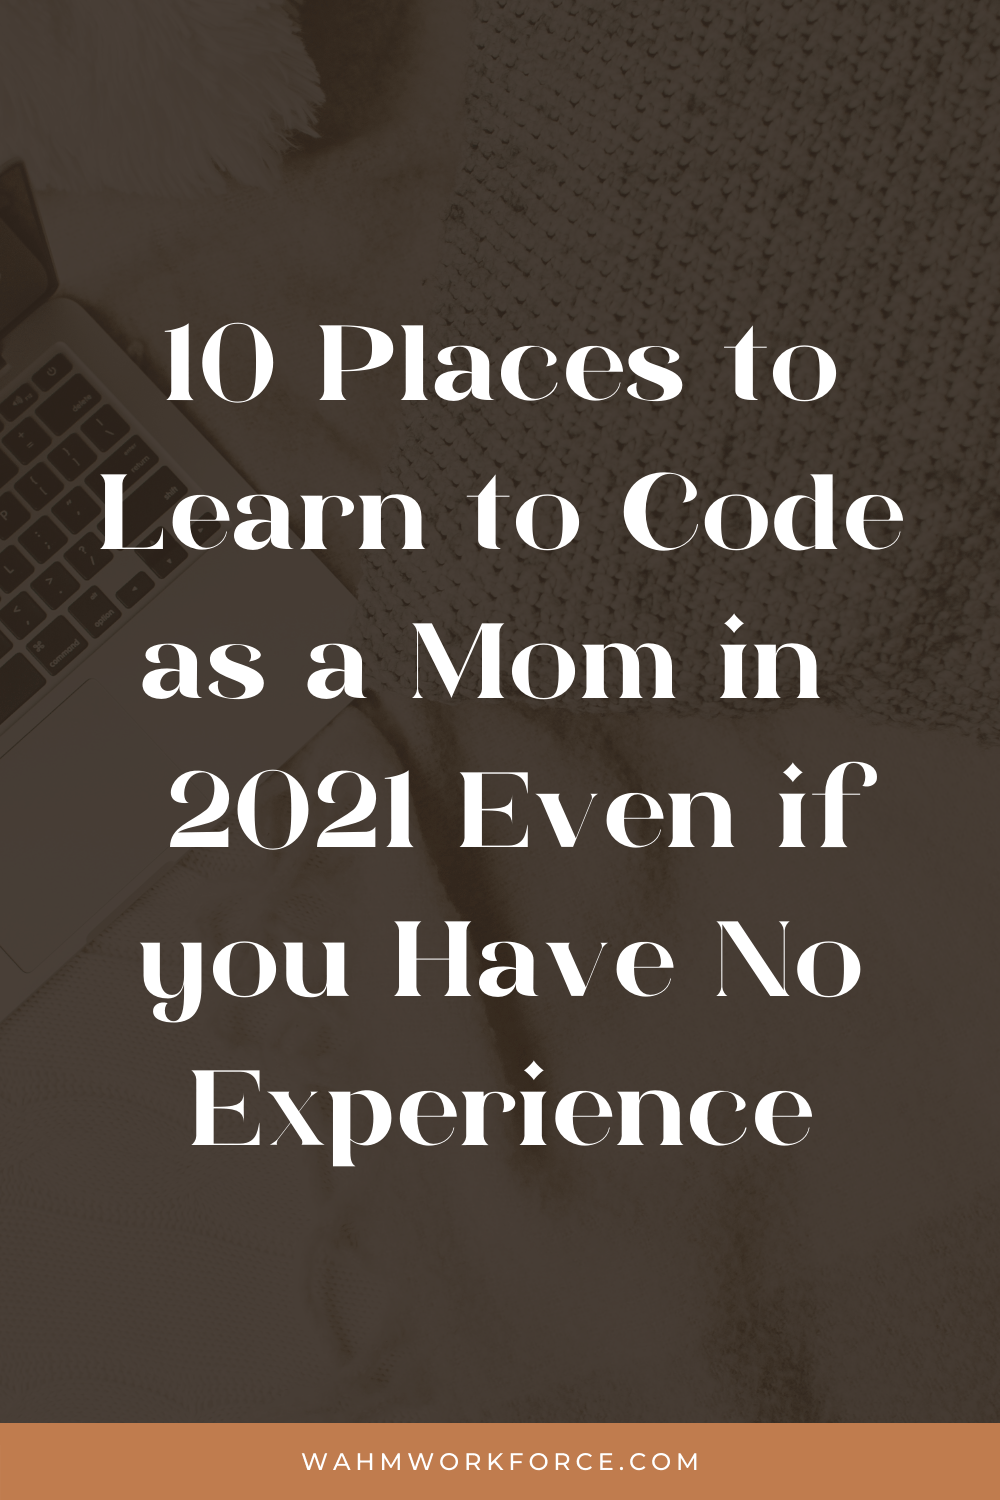 10 Places to Learn to Code Online Even if you Have No Experience (Free + Paid Options)